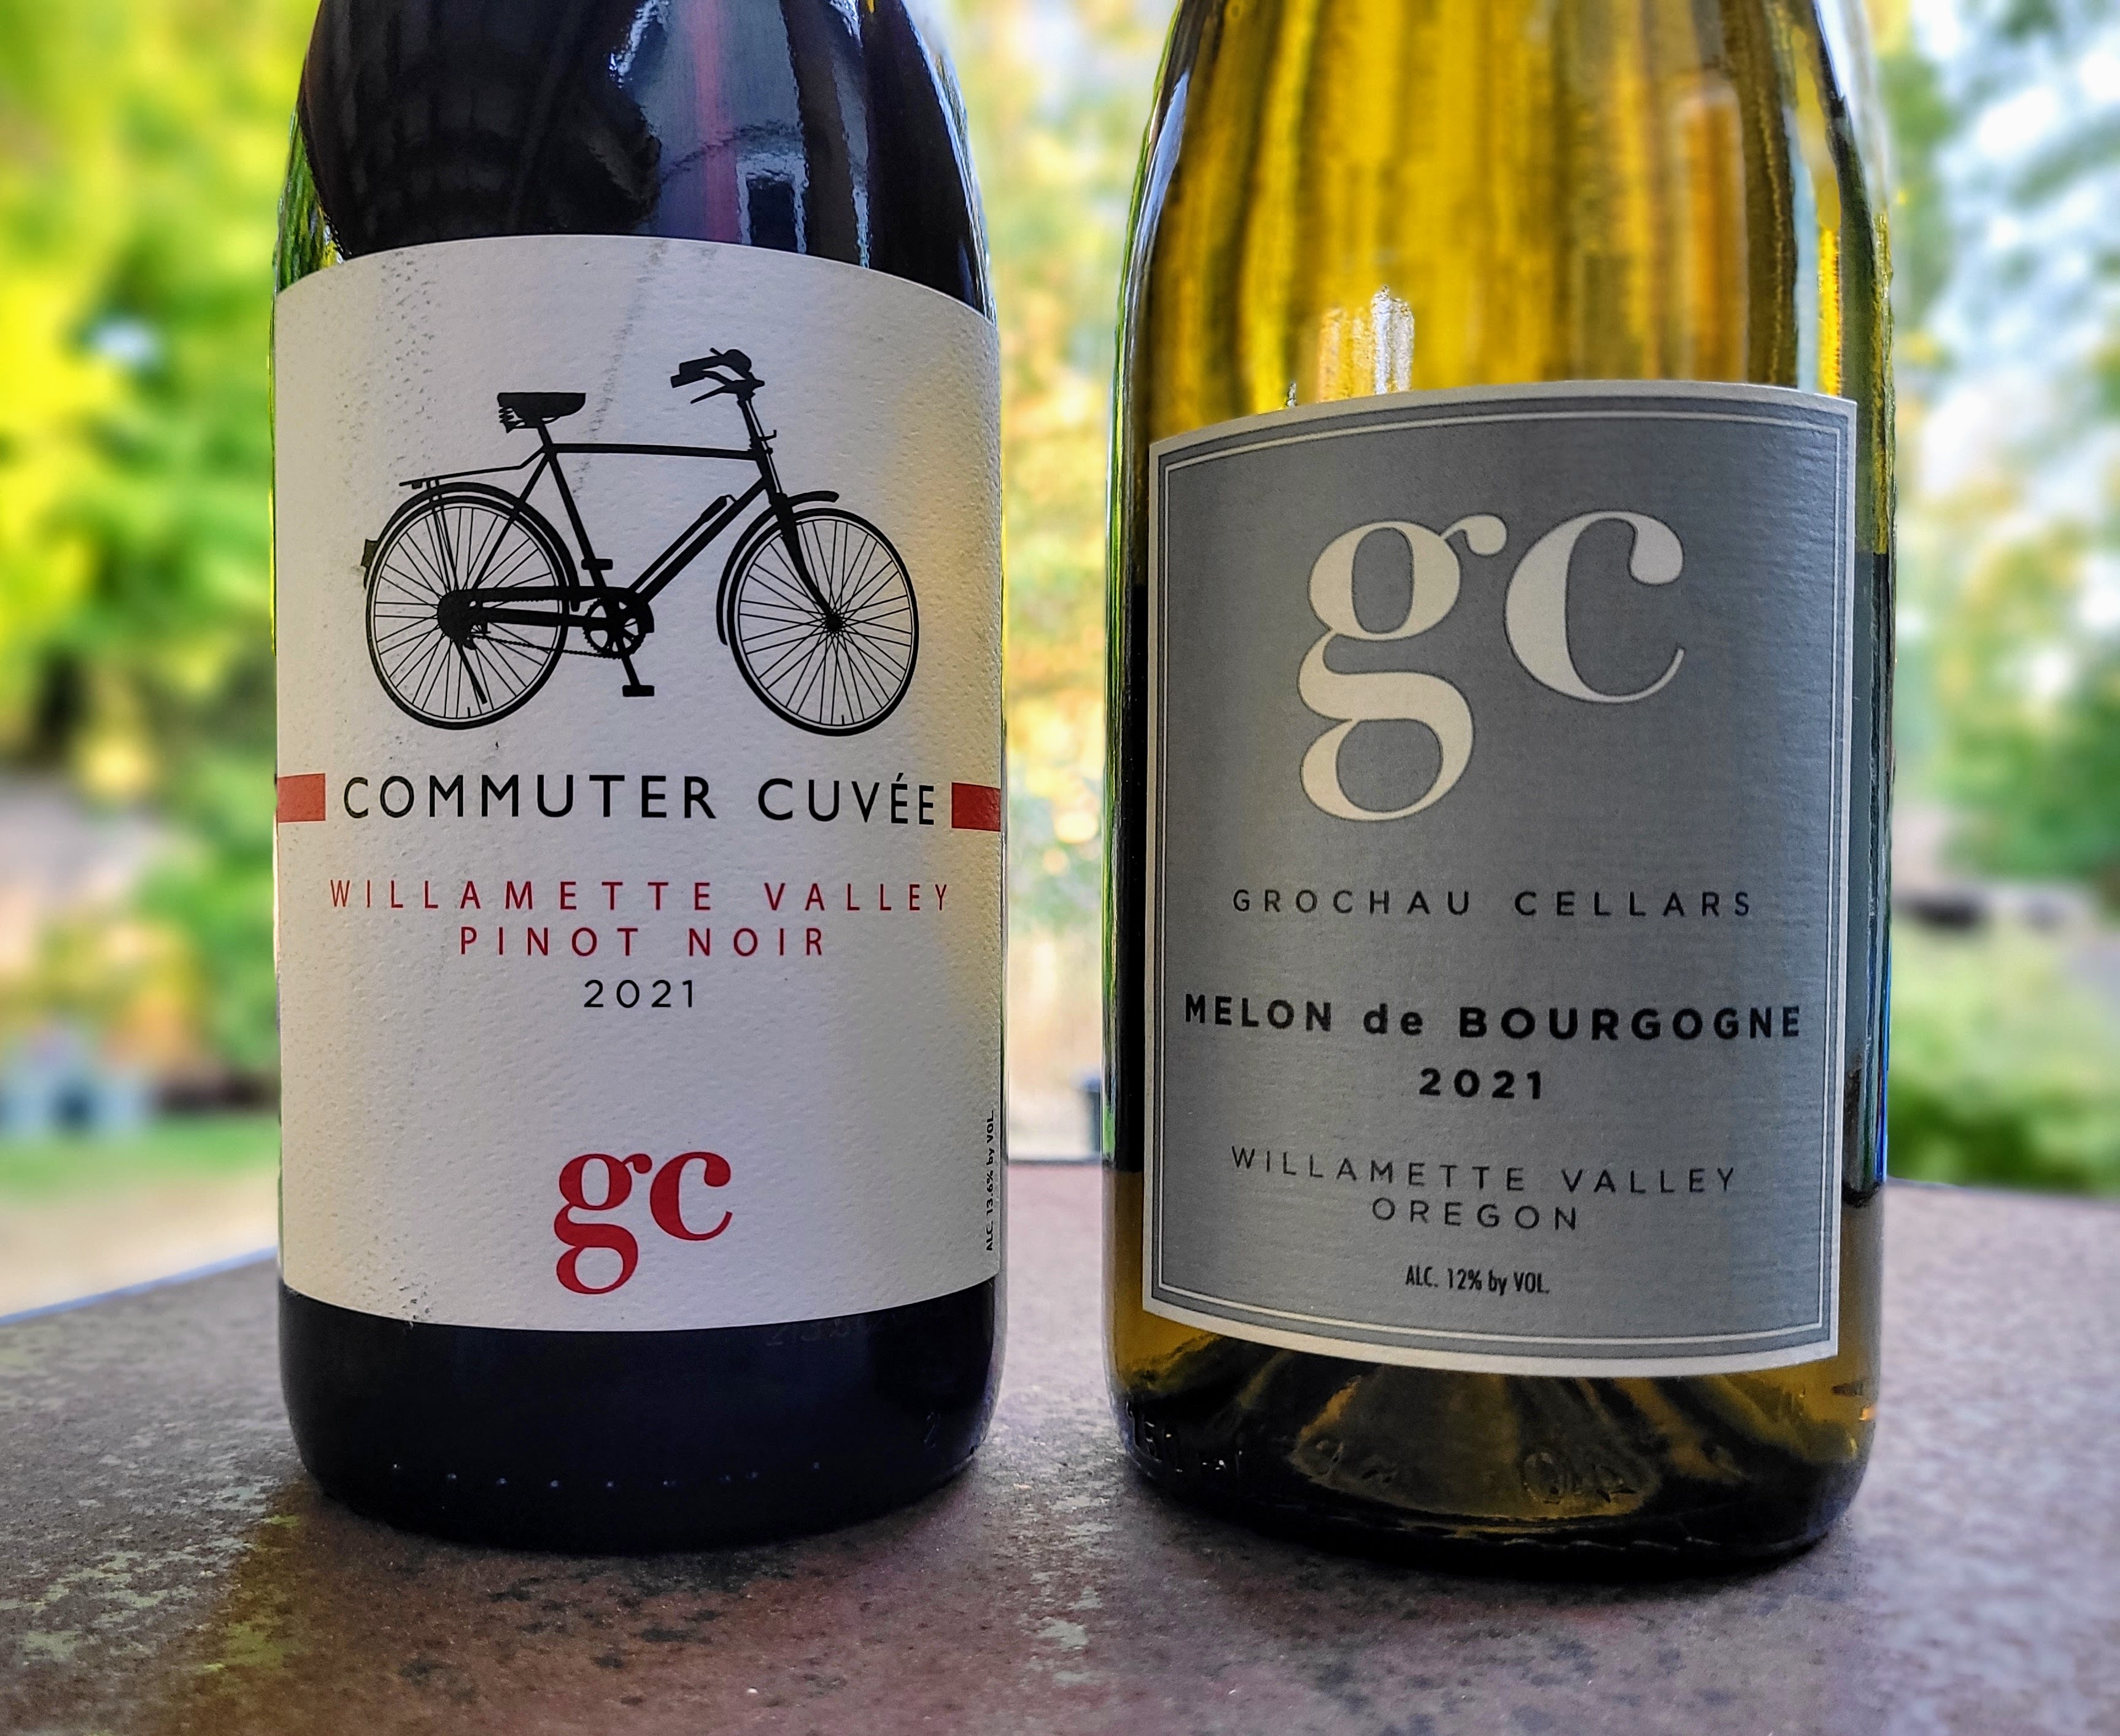 Grochau Cellars cements its reputation for transparency and